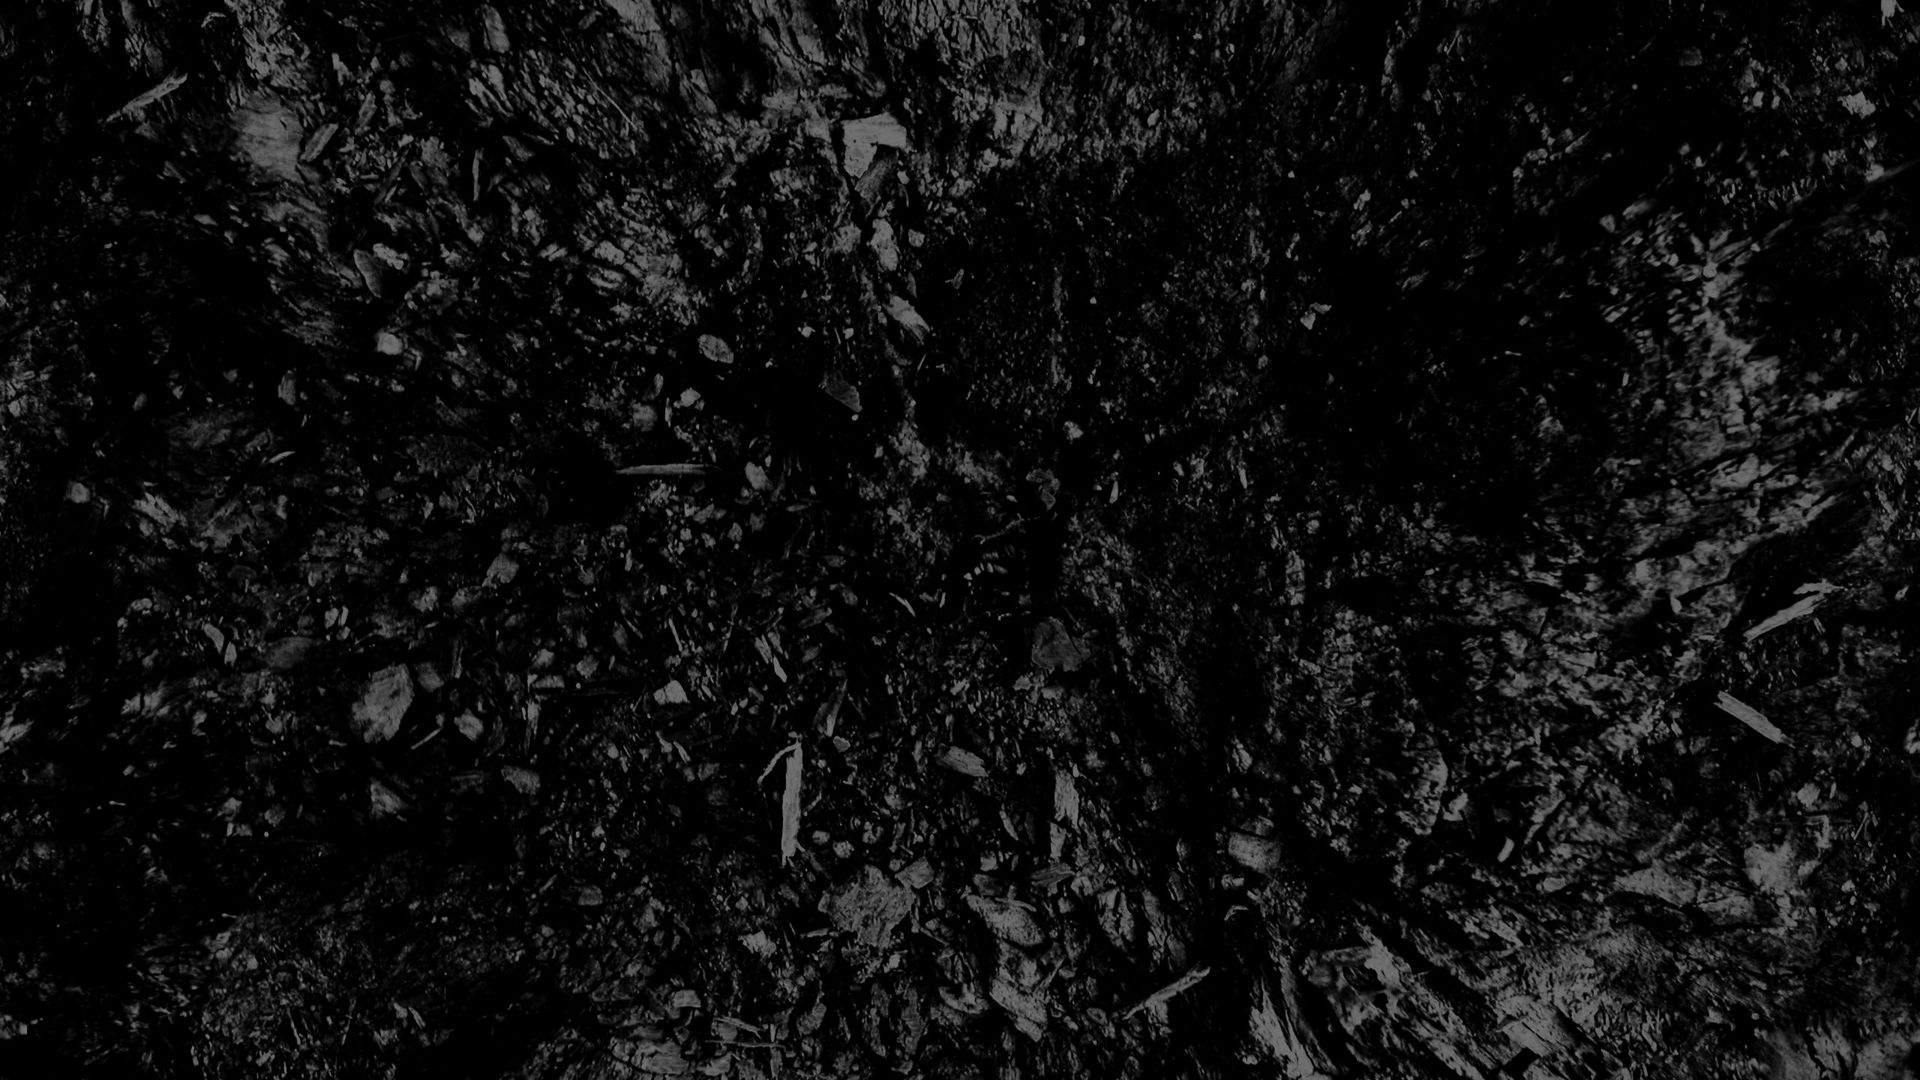 Download Wallpaper 19x1080 Dark Black And White Abstract Black Background Full Hd Hdtv Fhd 1080p Hd Background